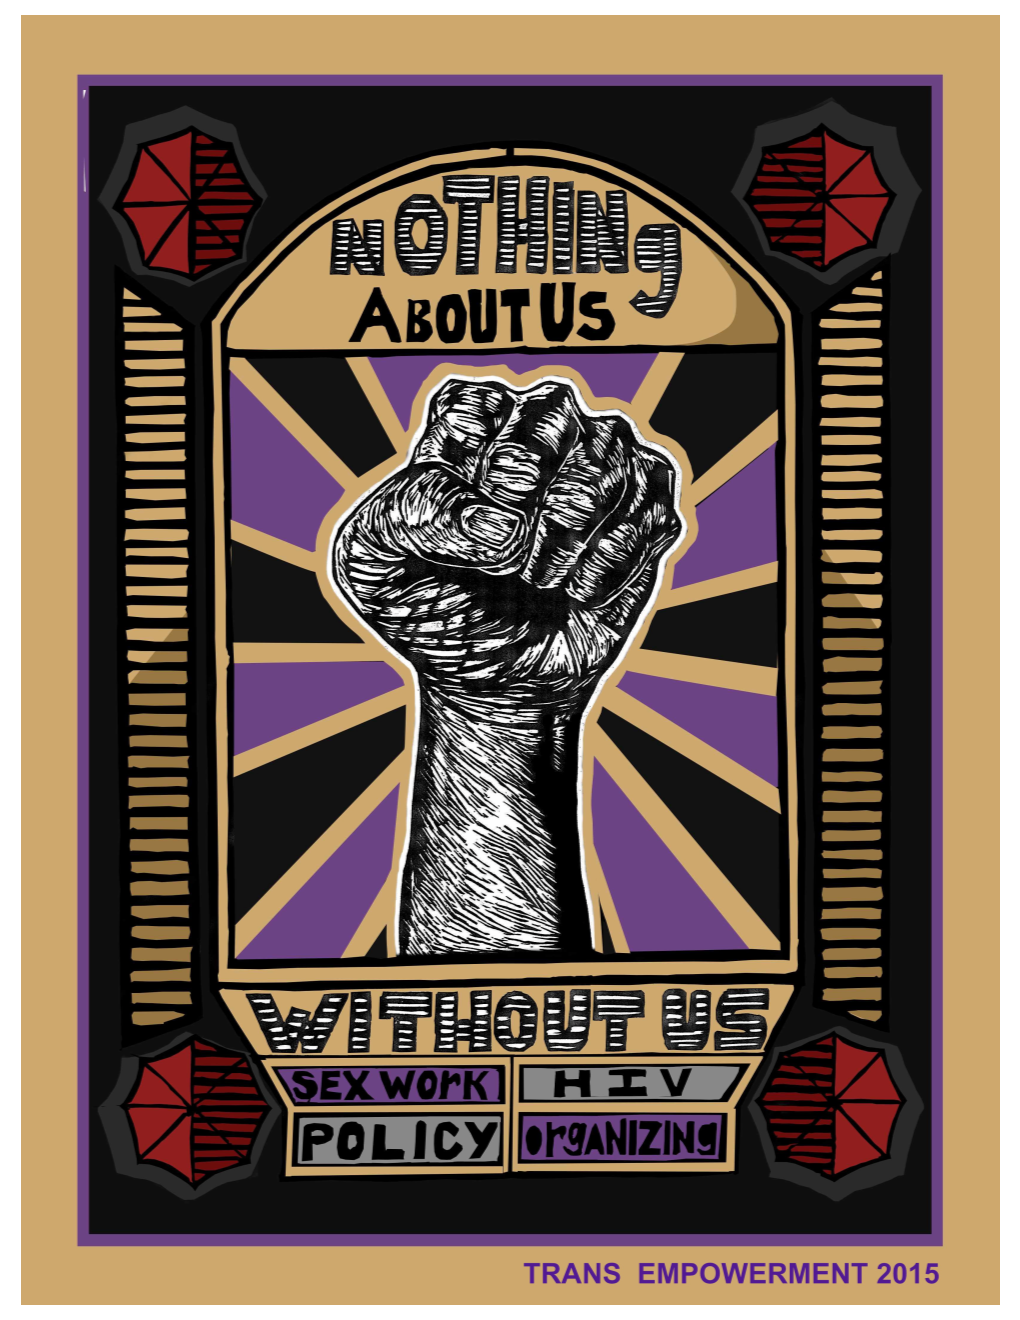 Nothing About Us Without Us: Sex Work, HIV, Policy, Organizing